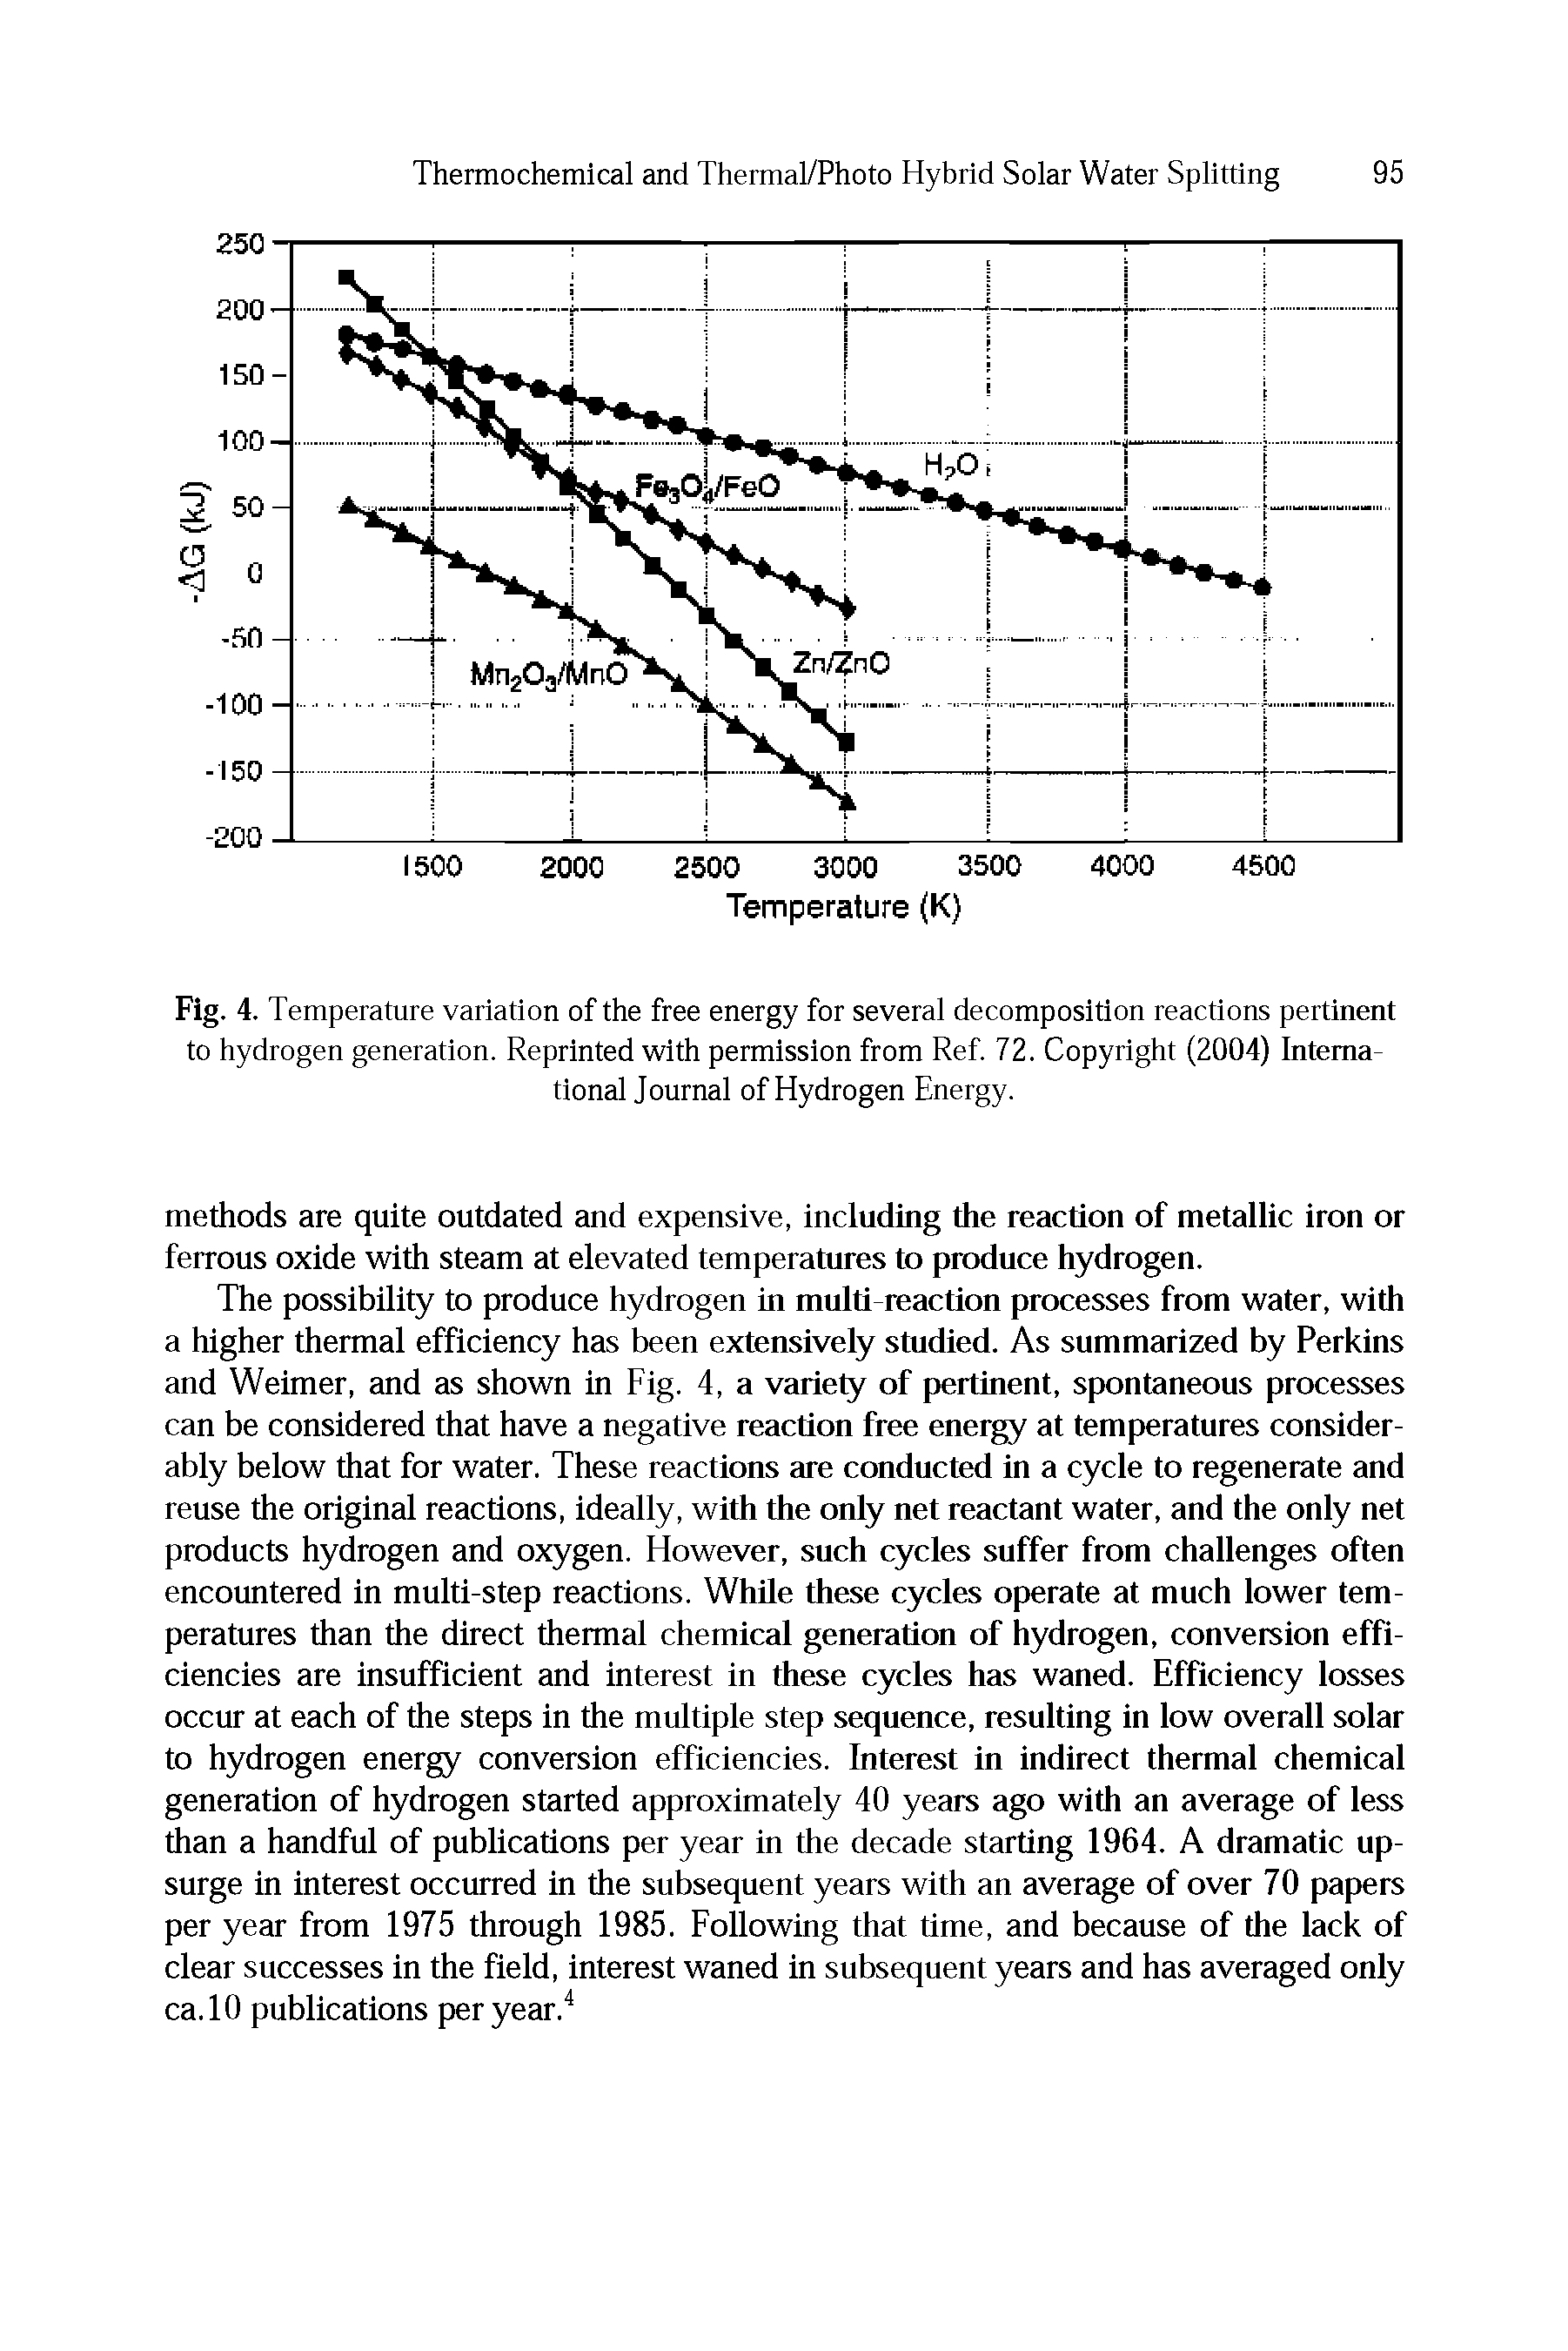 Fig. 4. Temperature variation of the free energy for several decomposition reactions pertinent to hydrogen generation. Reprinted with permission from Ref. 72. Copyright (2004) International Journal of Hydrogen Energy.